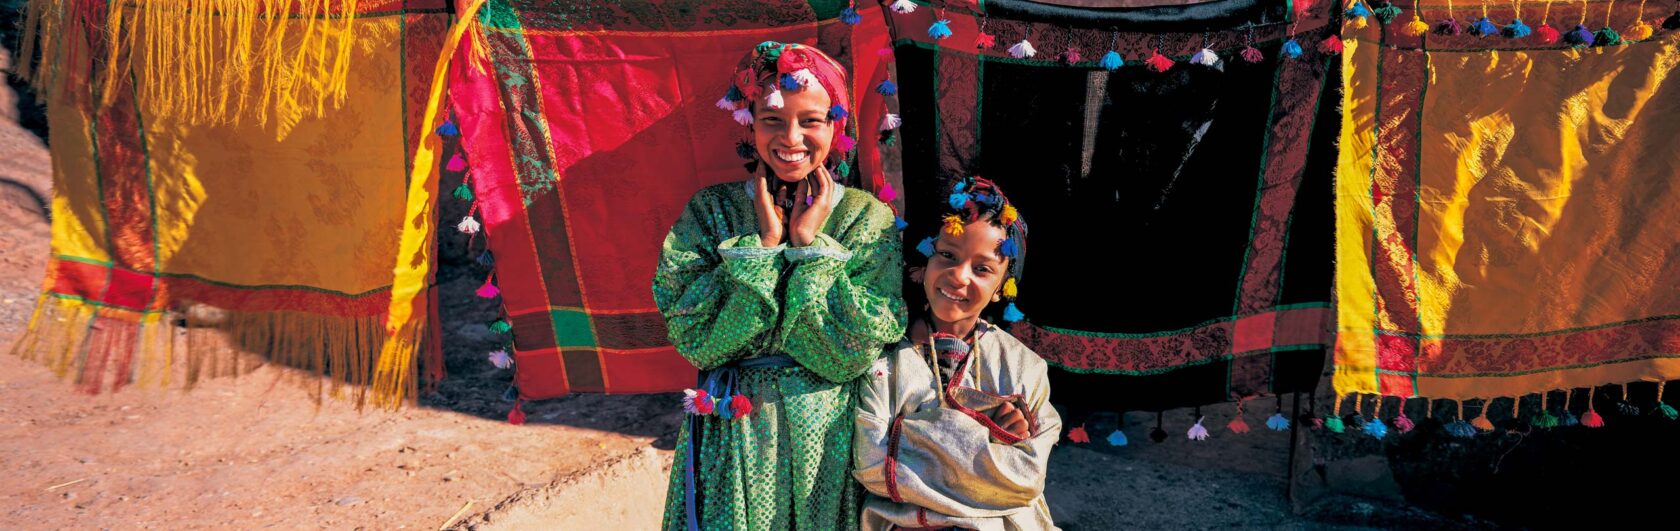 Two Moroccan girls with big smiles and colorful clothing stand in front of bright textiles.